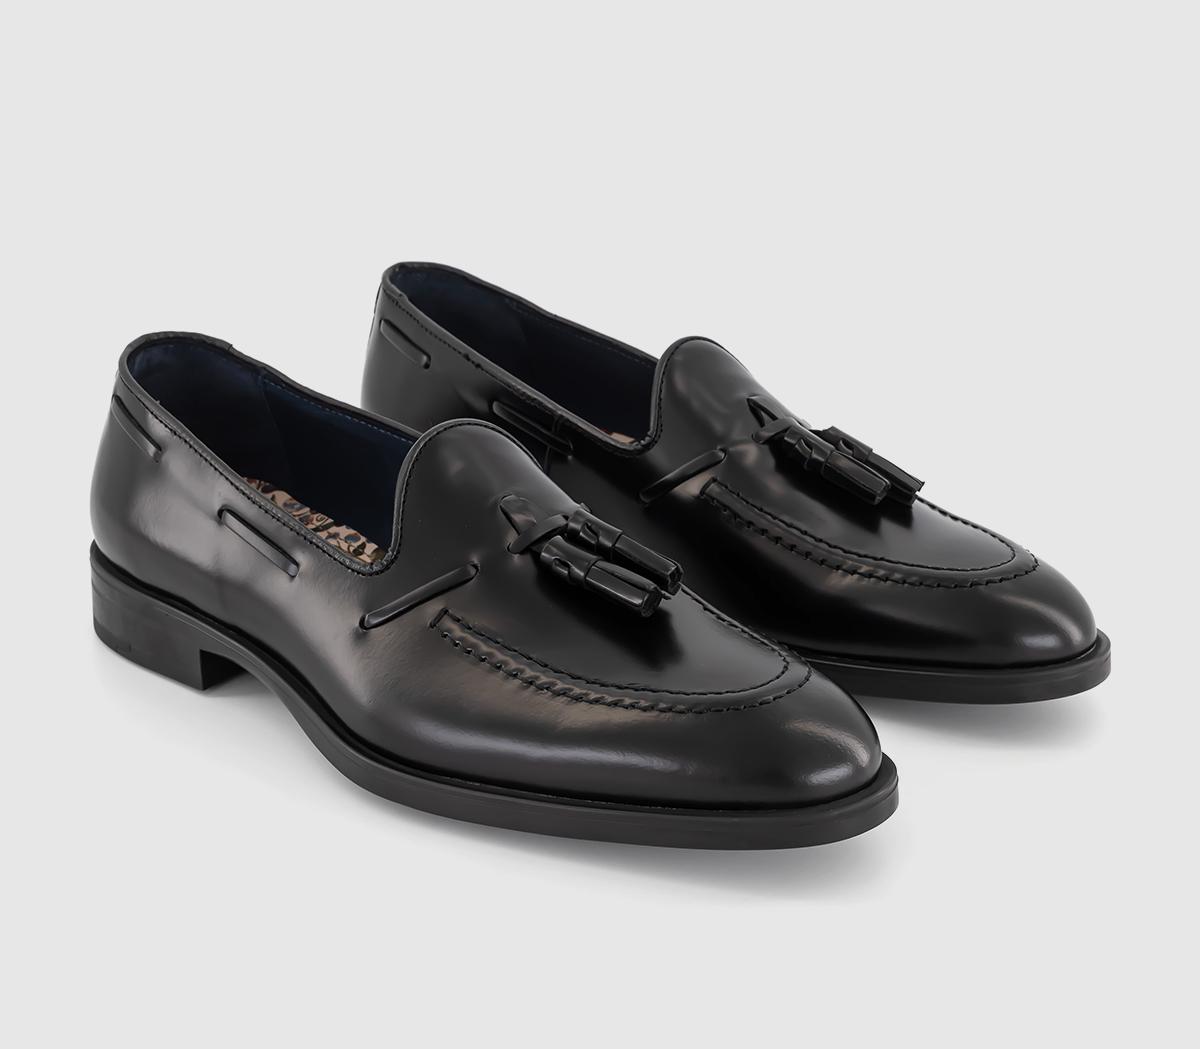 Poste Mens Painswick Tassel Loafers Black Leather, 10